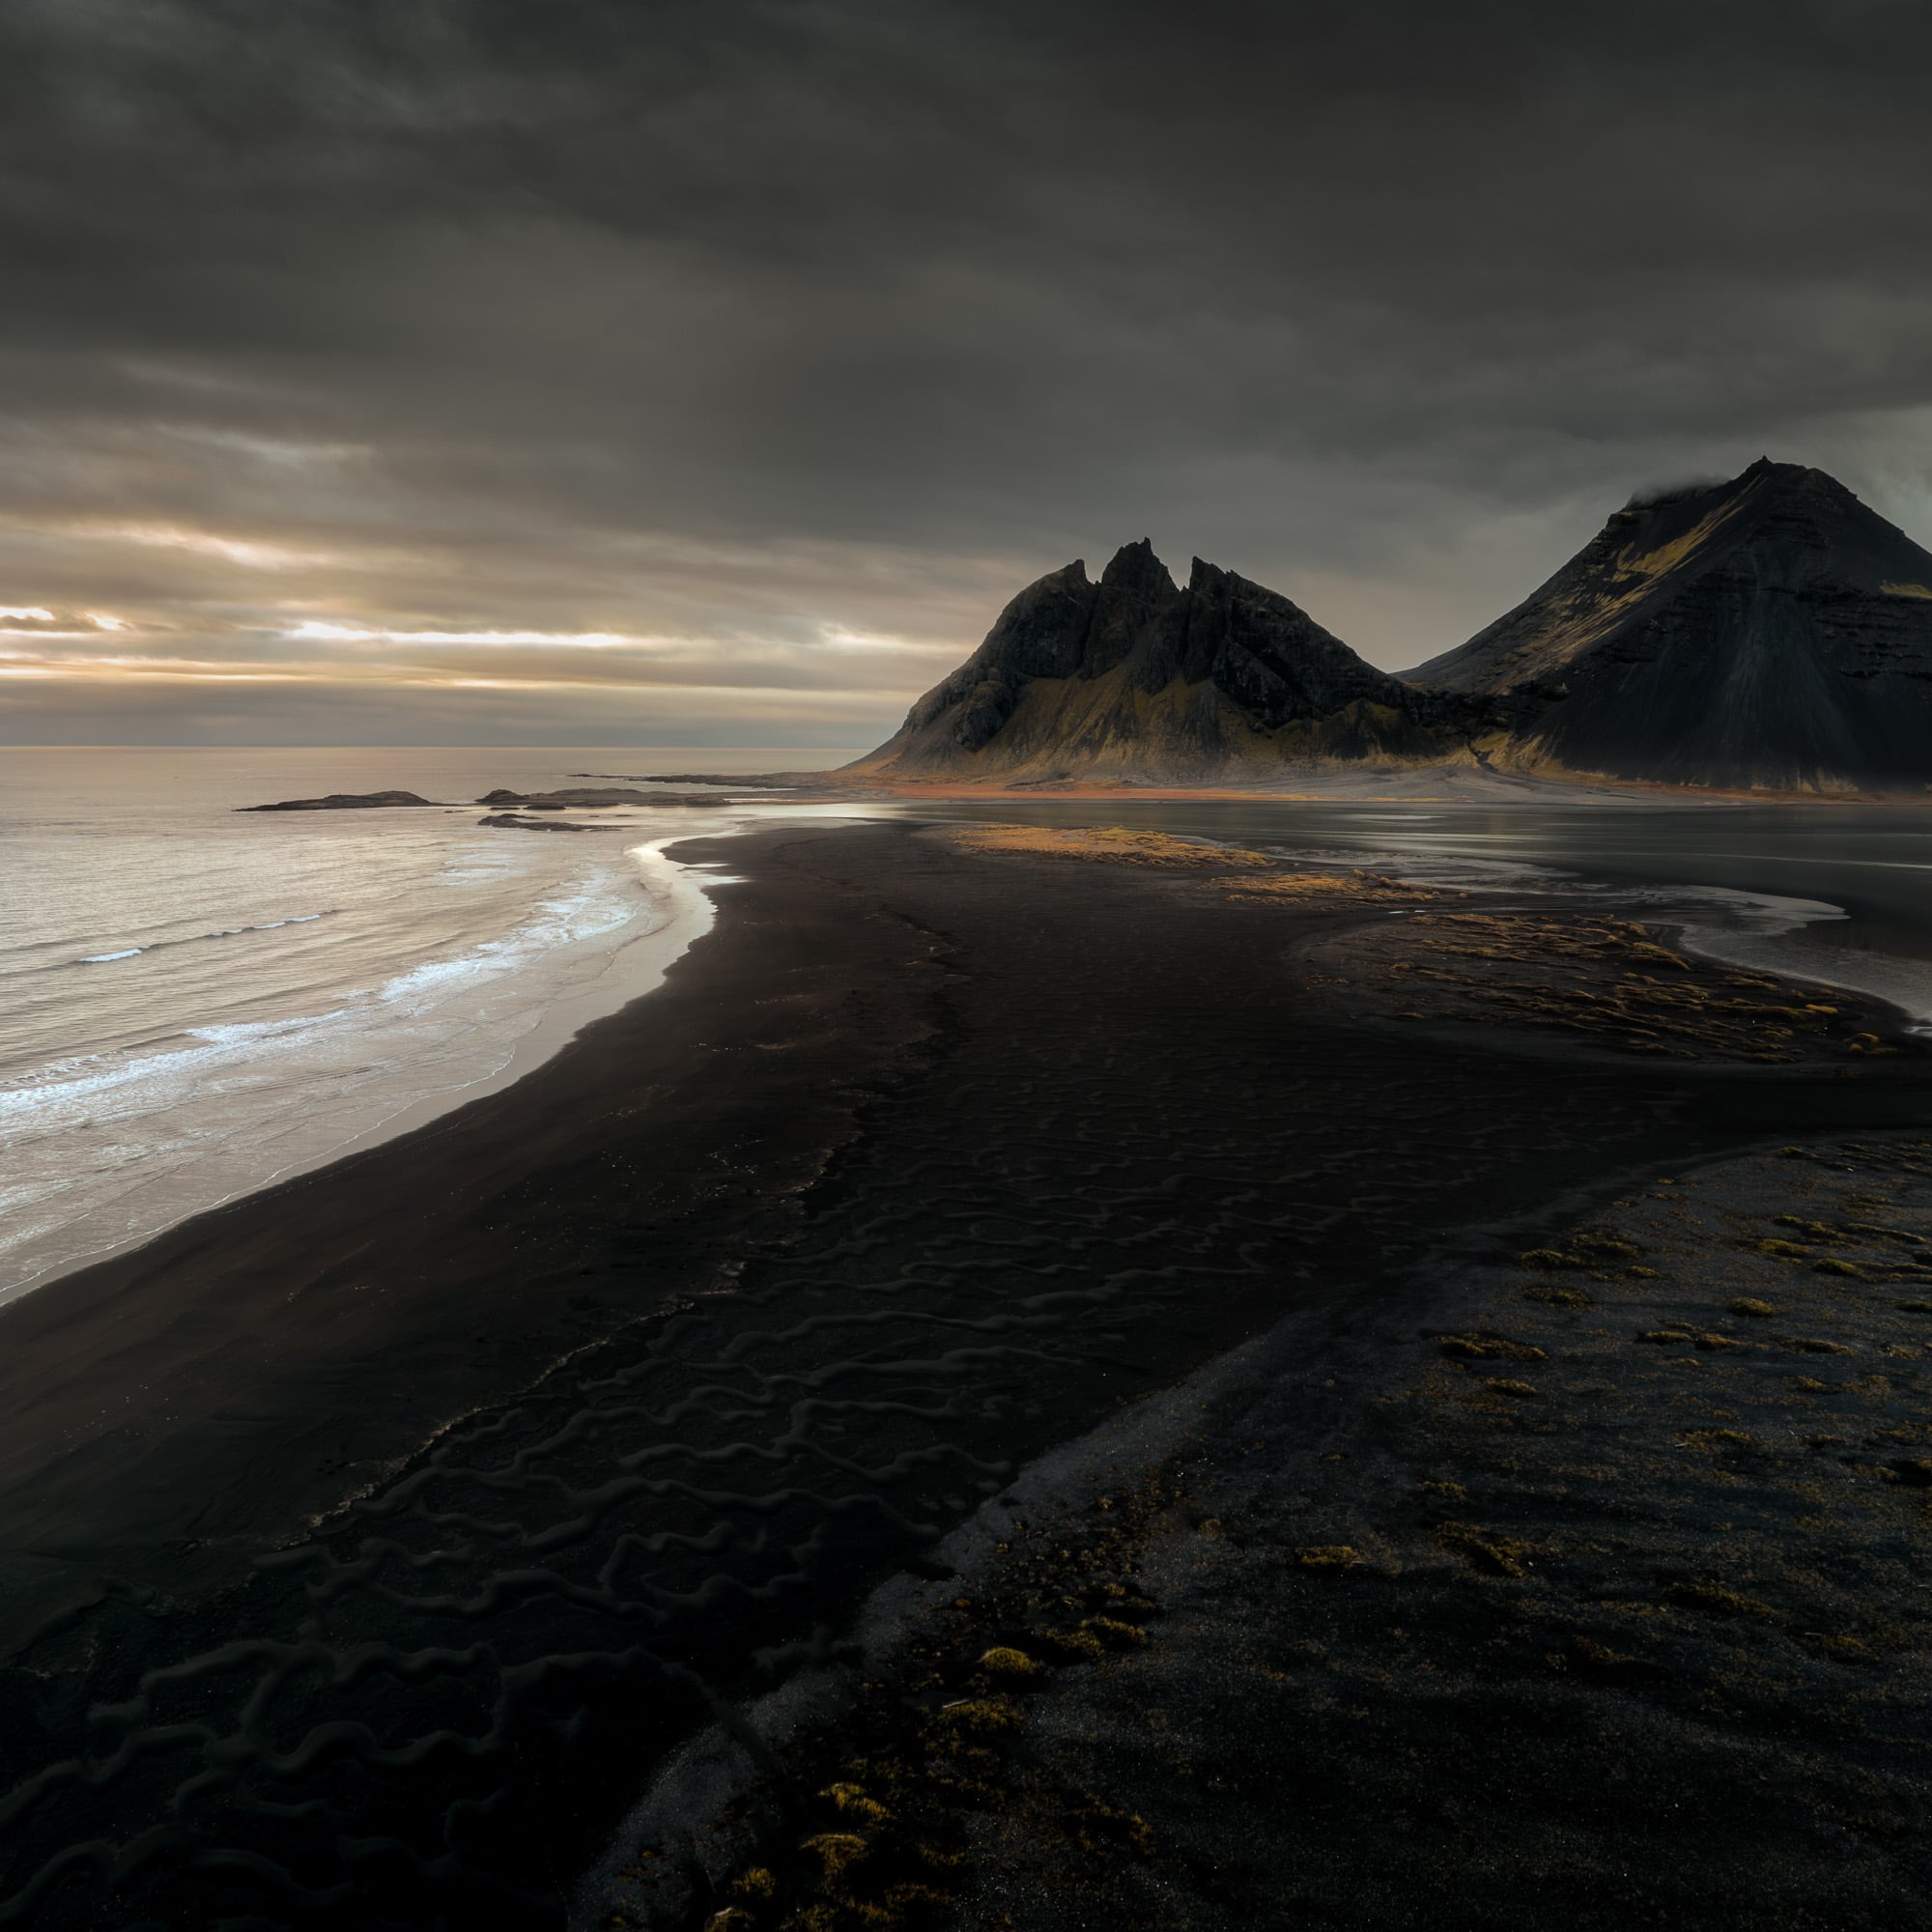 Sunset at Vestrahorn, Iceland, with the mountain's silhouette against a dramatic sky and patterns in the dark sand leading to the sea.